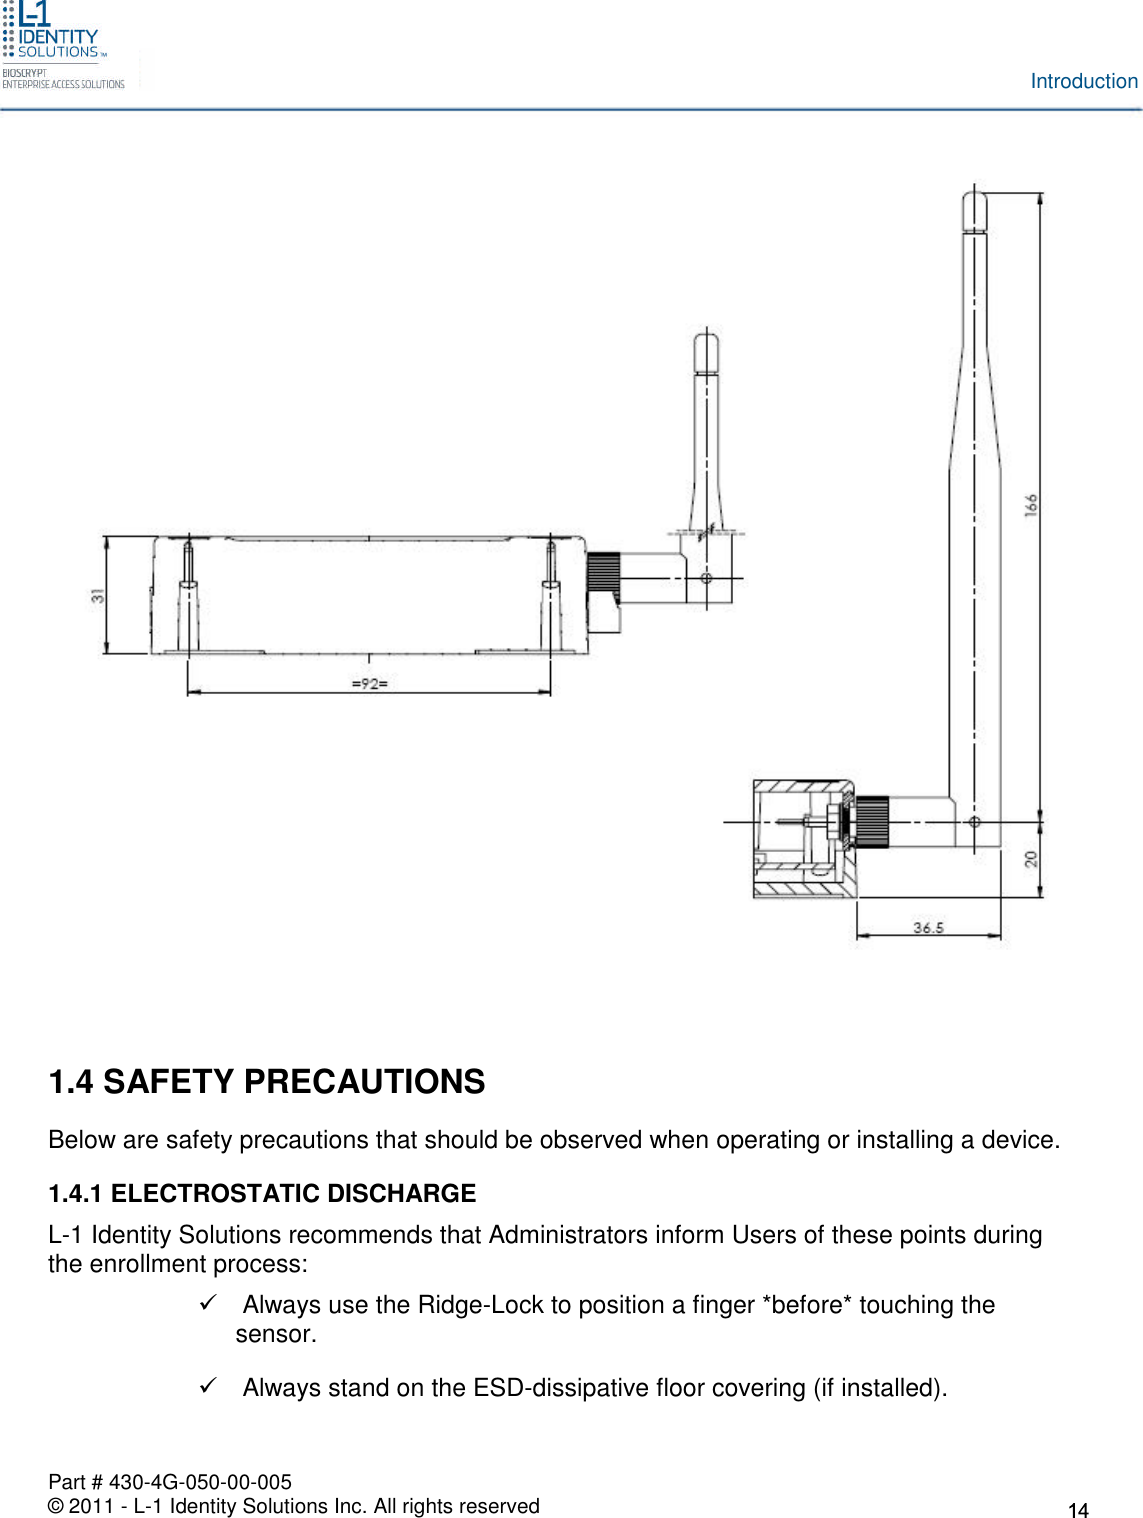 Part # 430-4G-050-00-005© 2011 - L-1 Identity Solutions Inc. All rights reservedIntroduction1.4 SAFETY PRECAUTIONSBelow are safety precautions that should be observed when operating or installing a device.1.4.1 ELECTROSTATIC DISCHARGEL-1 Identity Solutions recommends that Administrators inform Users of these points duringthe enrollment process:Always use the Ridge-Lock to position a finger *before* touching thesensor.Always stand on the ESD-dissipative floor covering (if installed).